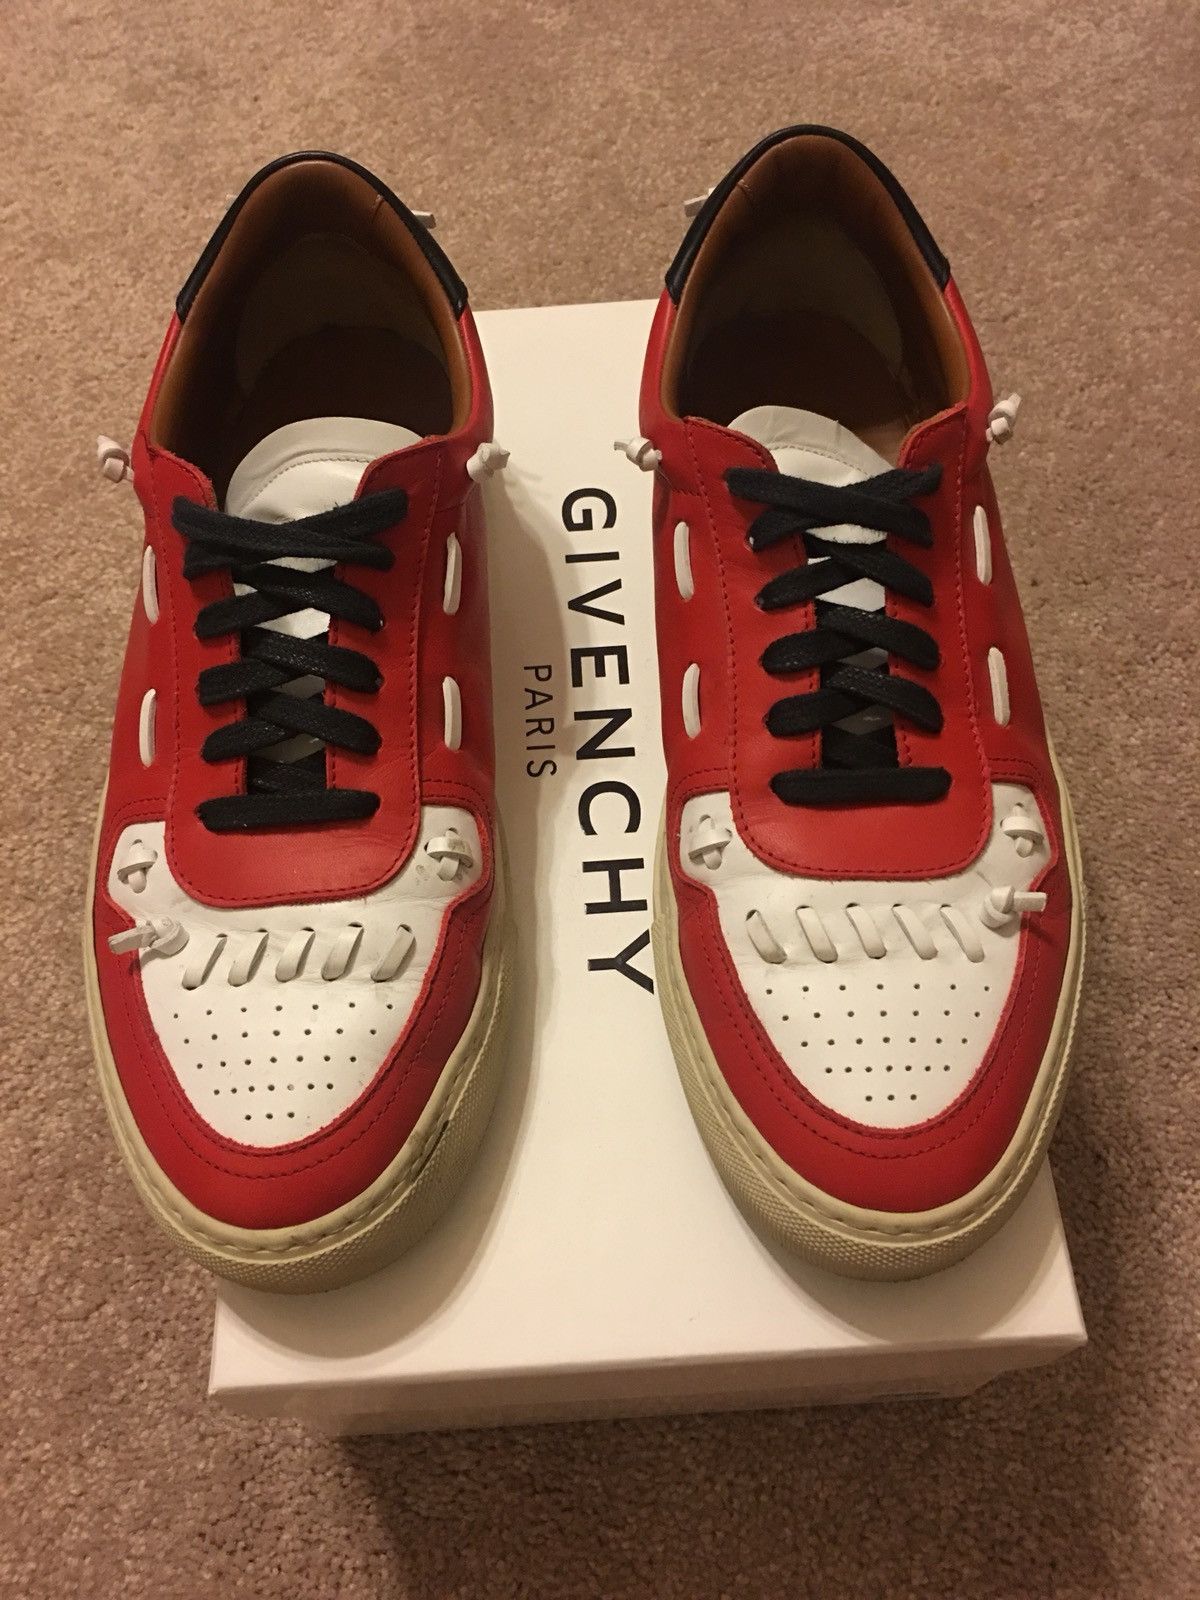 Givenchy Chicago Red Paneled Sneakers | Grailed